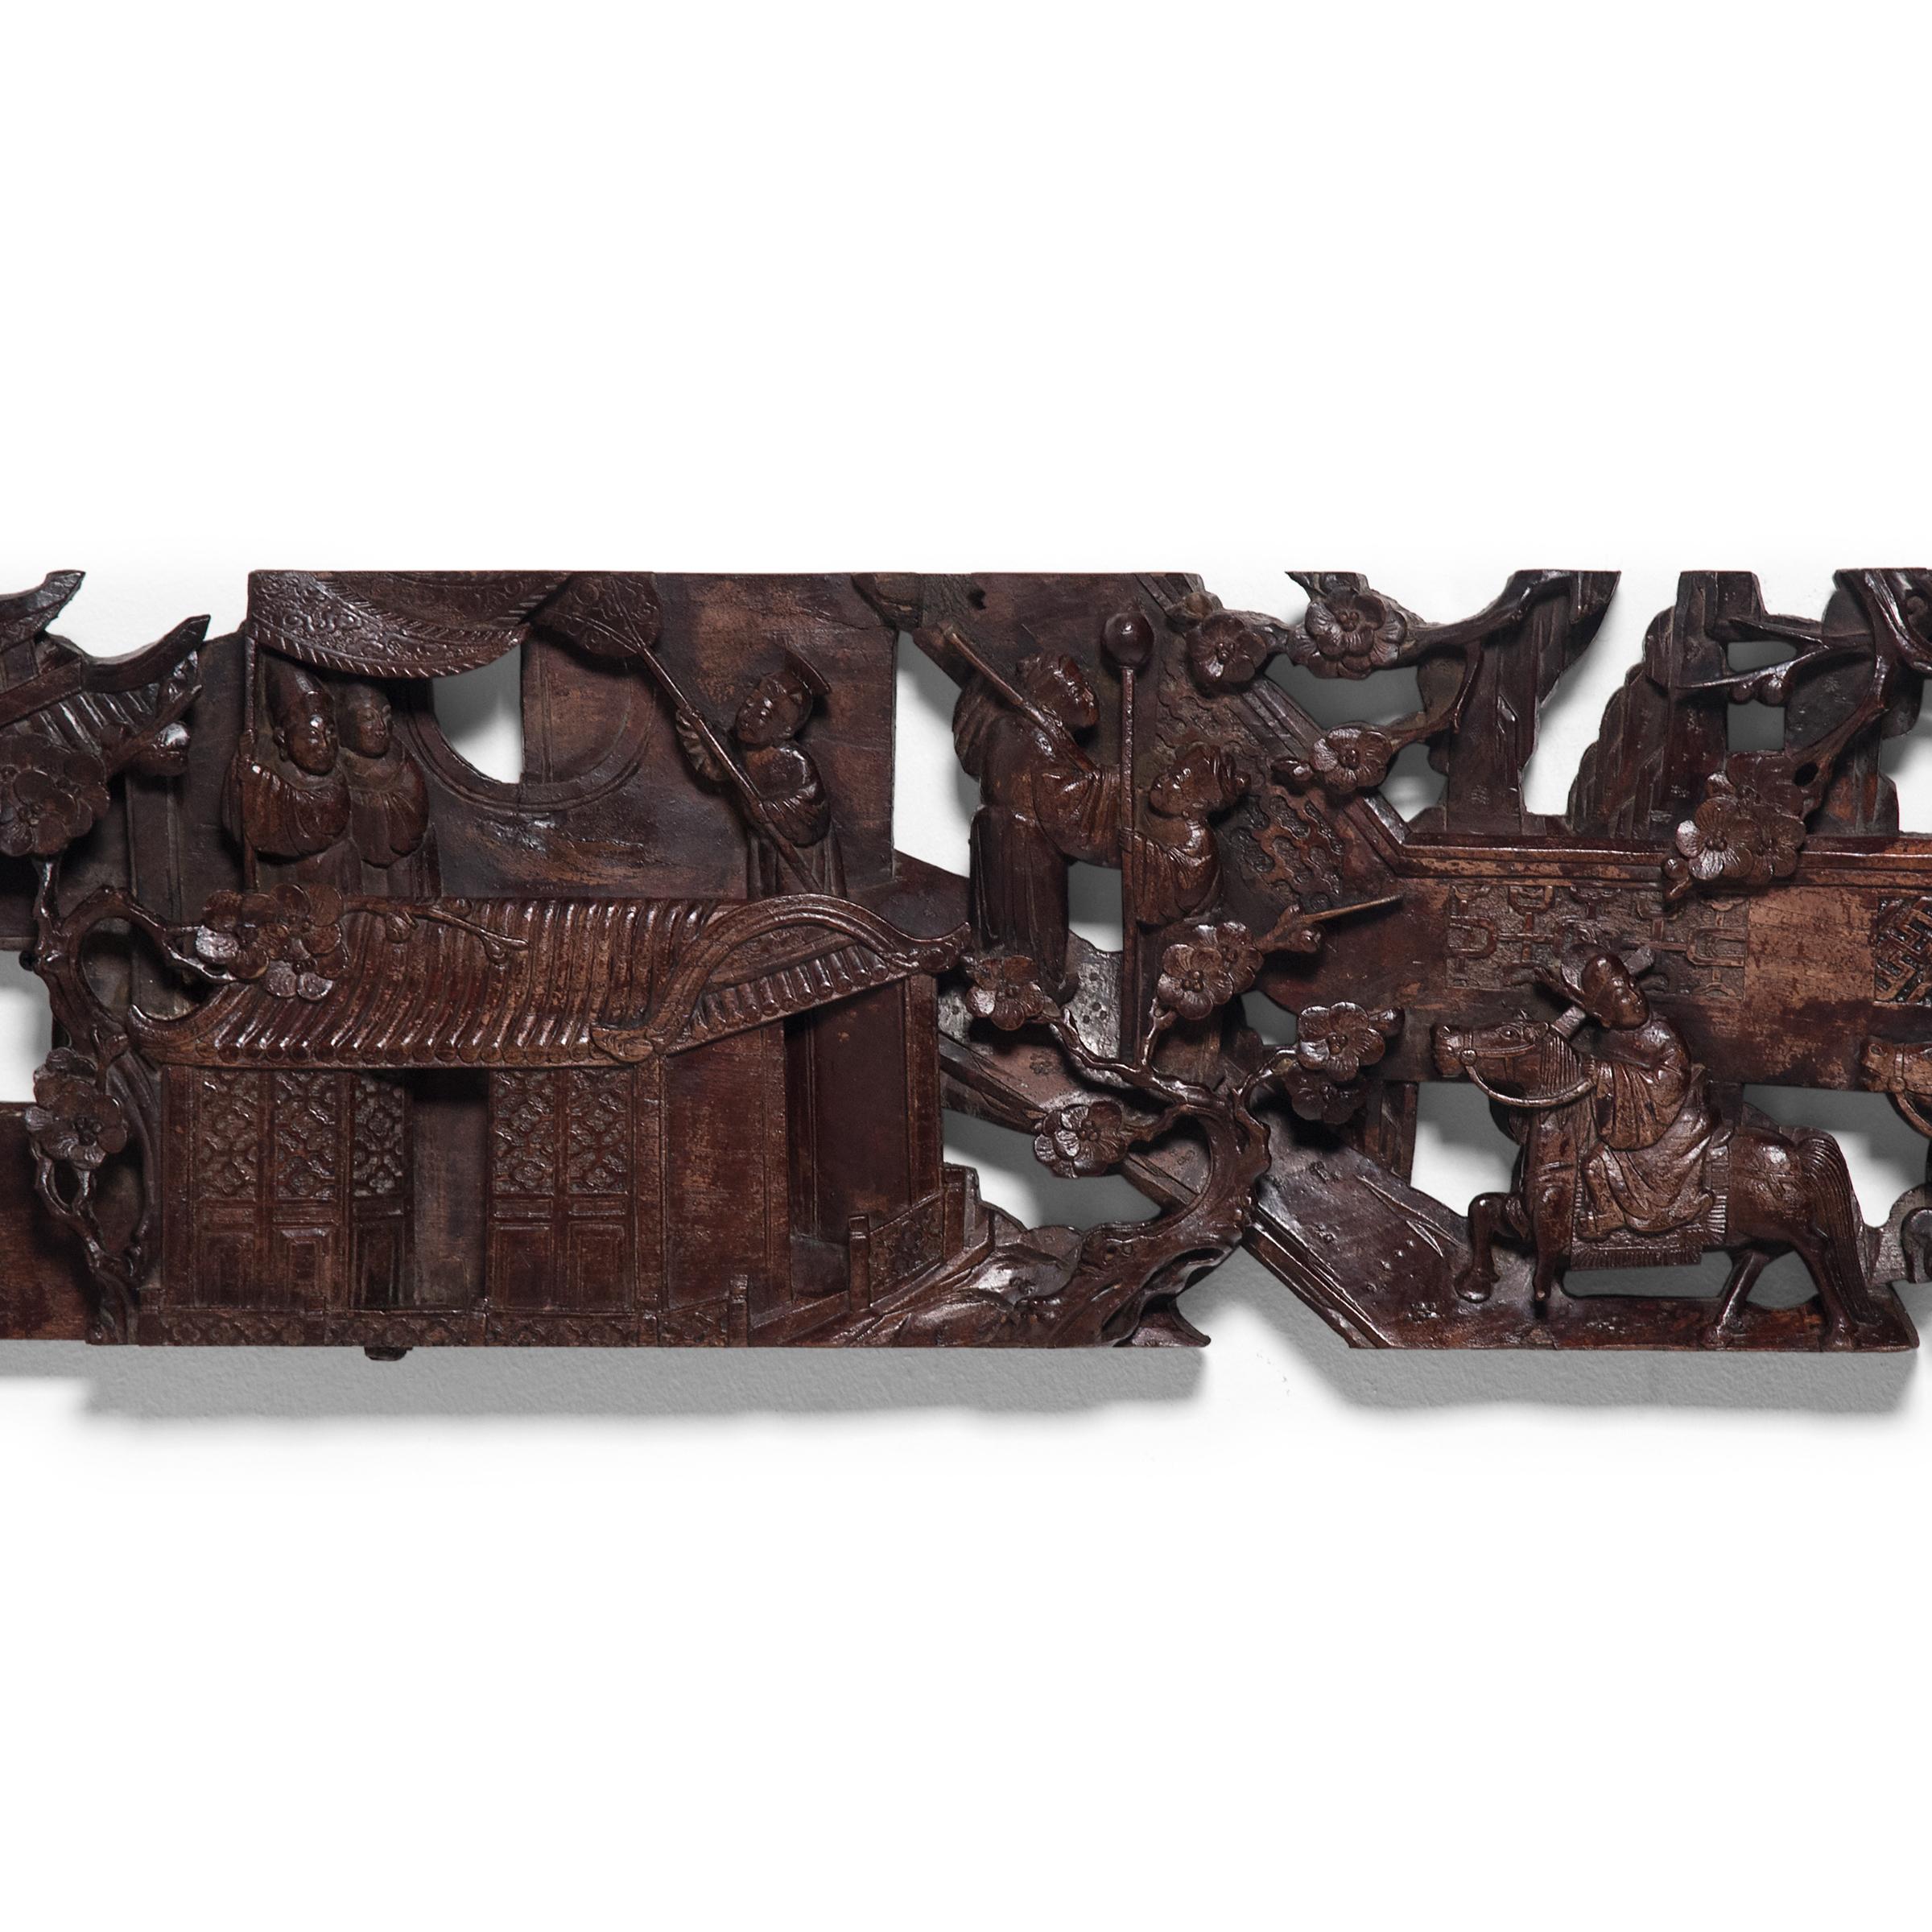 In traditional Chinese architecture, classic timber framework buildings were often enhanced by elaborate finishes and finely carved embellishments - such as this 19th-century elmwood valance. The valance is hand-carved in relief with pierced